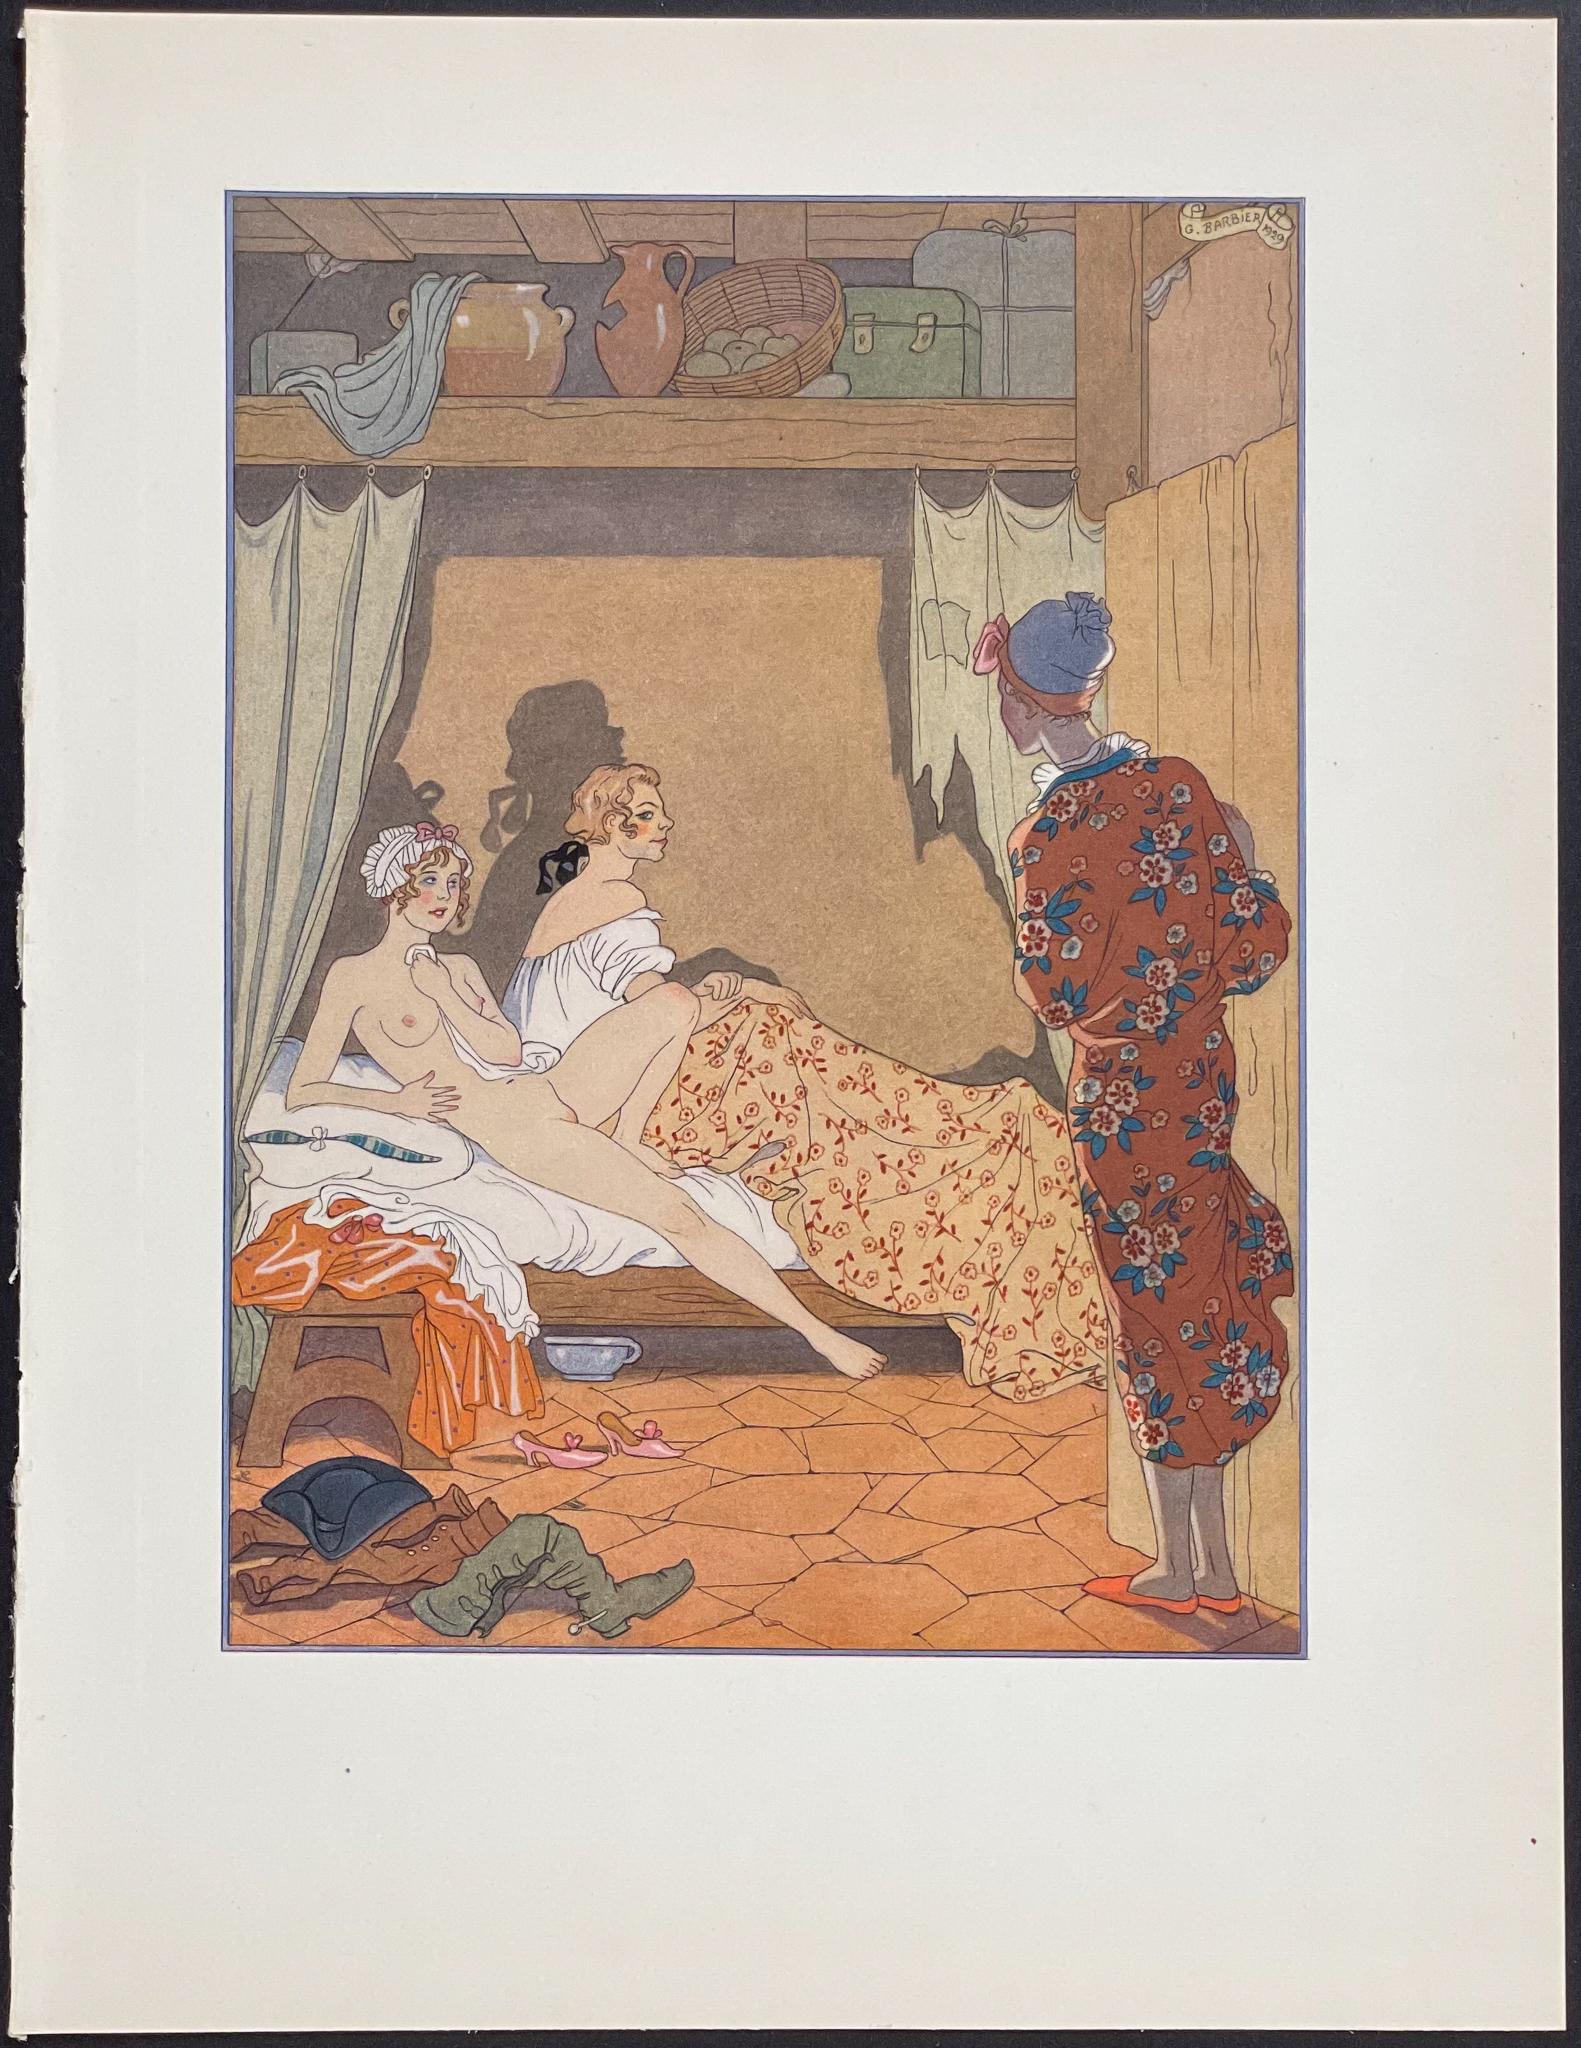 "Voyeur of Couple in Bed" by Georges Barbier